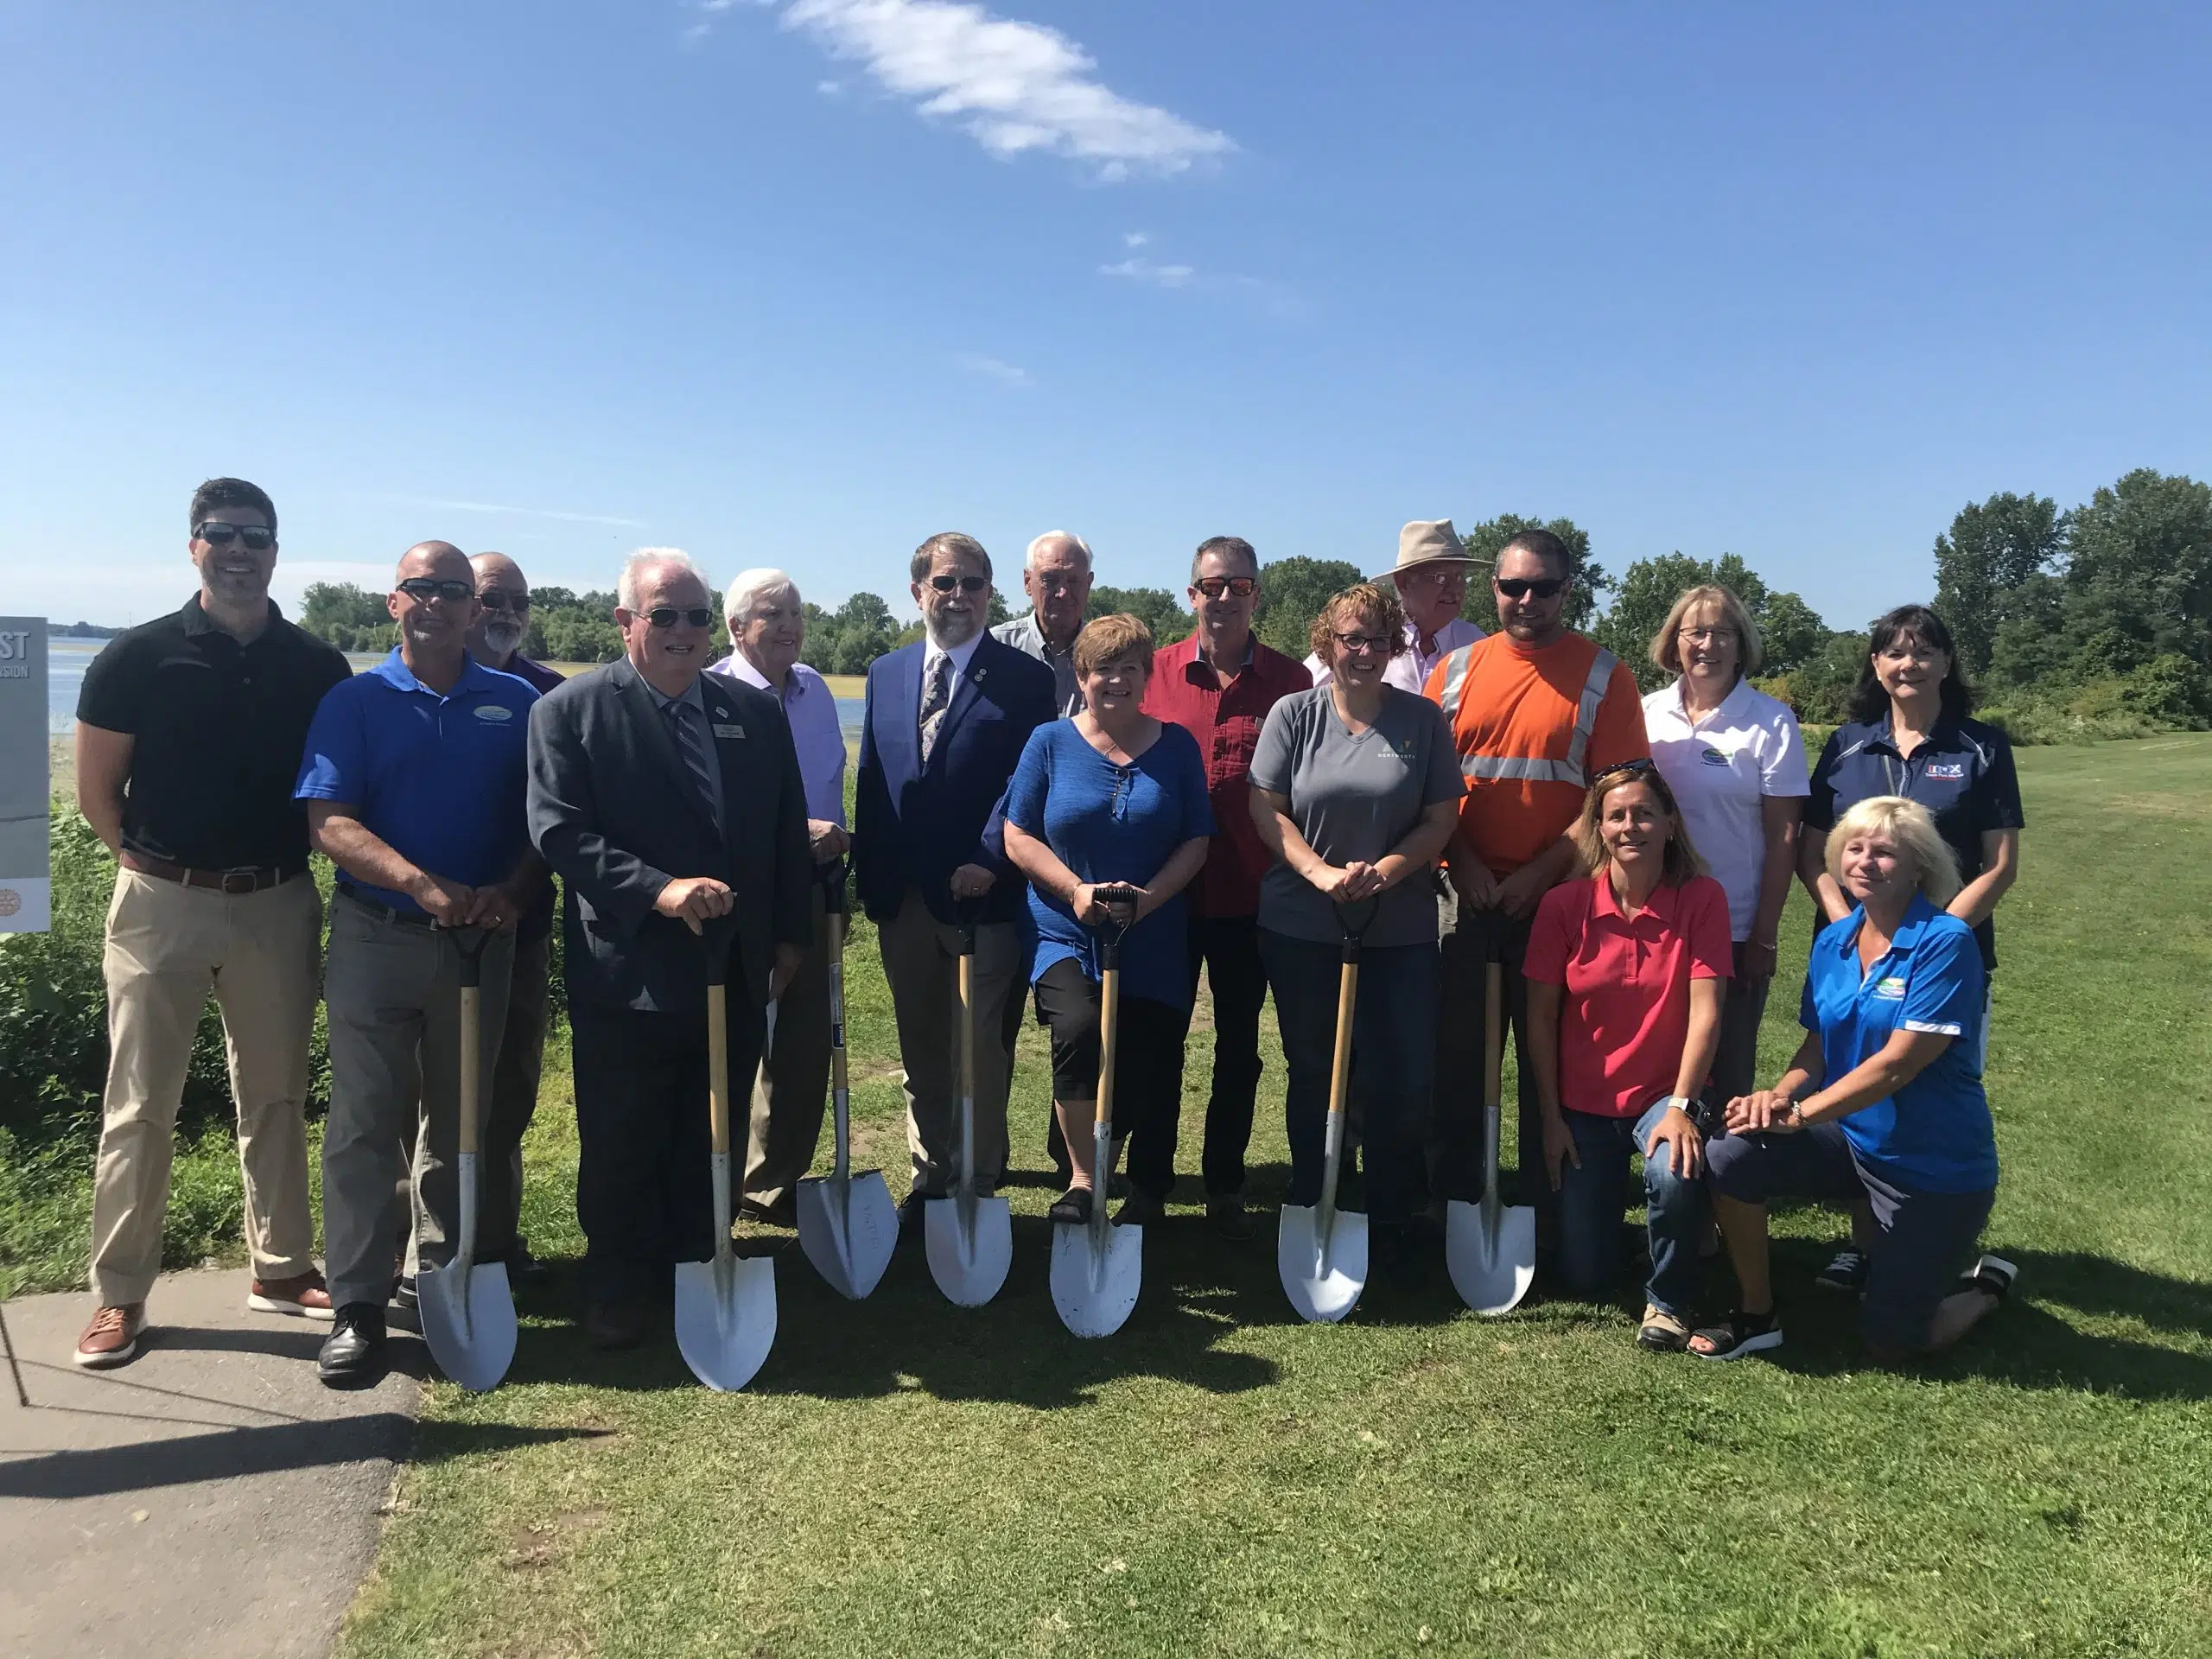 Ground has broken on a new trail extension in Quinte West